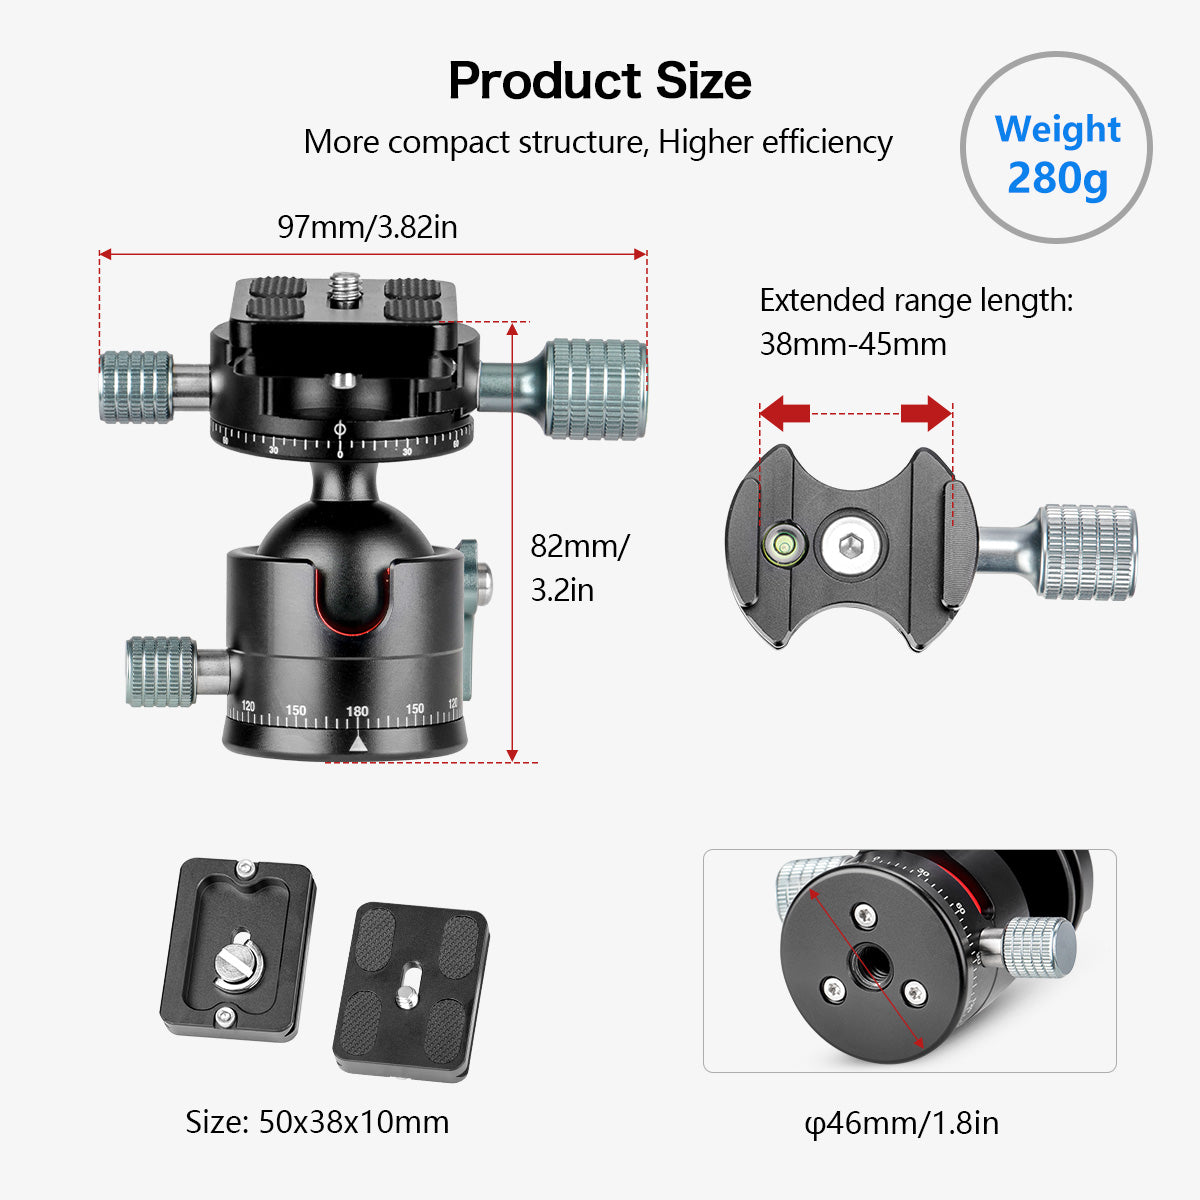 Low Profile Ball Head, 360 Degrees Double Panoramic Head Φ36mm Metal ball diameter and 1/4" Screw Arca-Type QR Plate for DSLR,Tripod. Max Load 33lbs/15kg